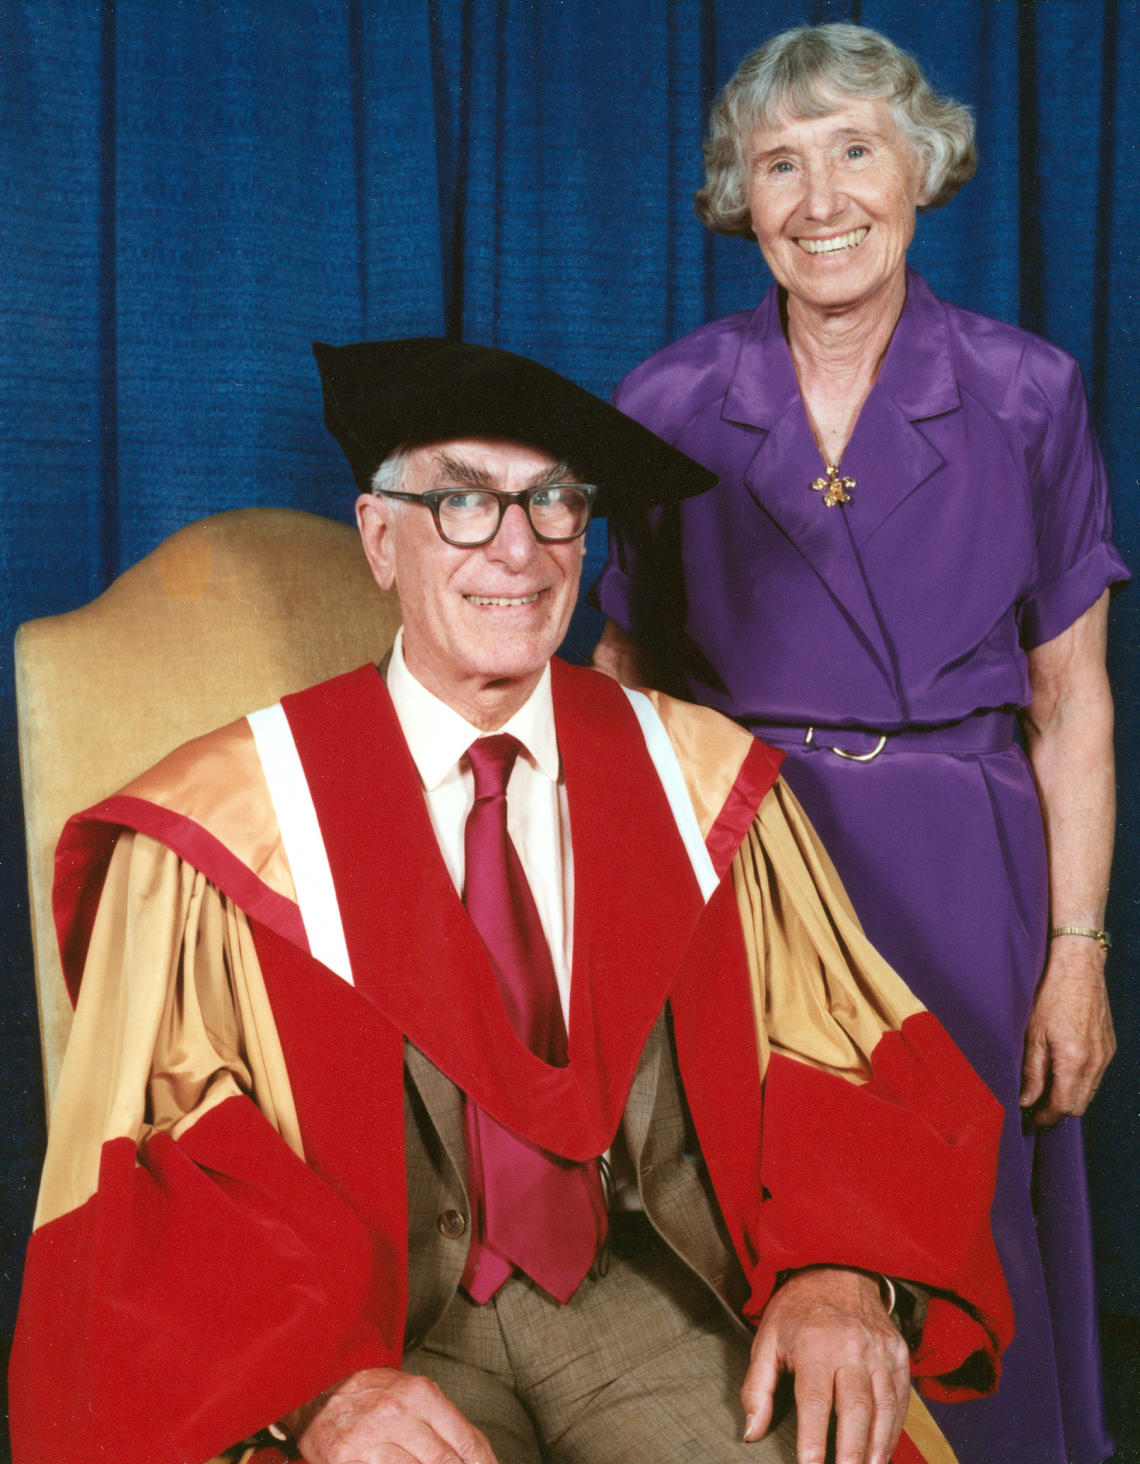 Richard and Louise at UCalgary's honourary doctorate ceremony in 1991.